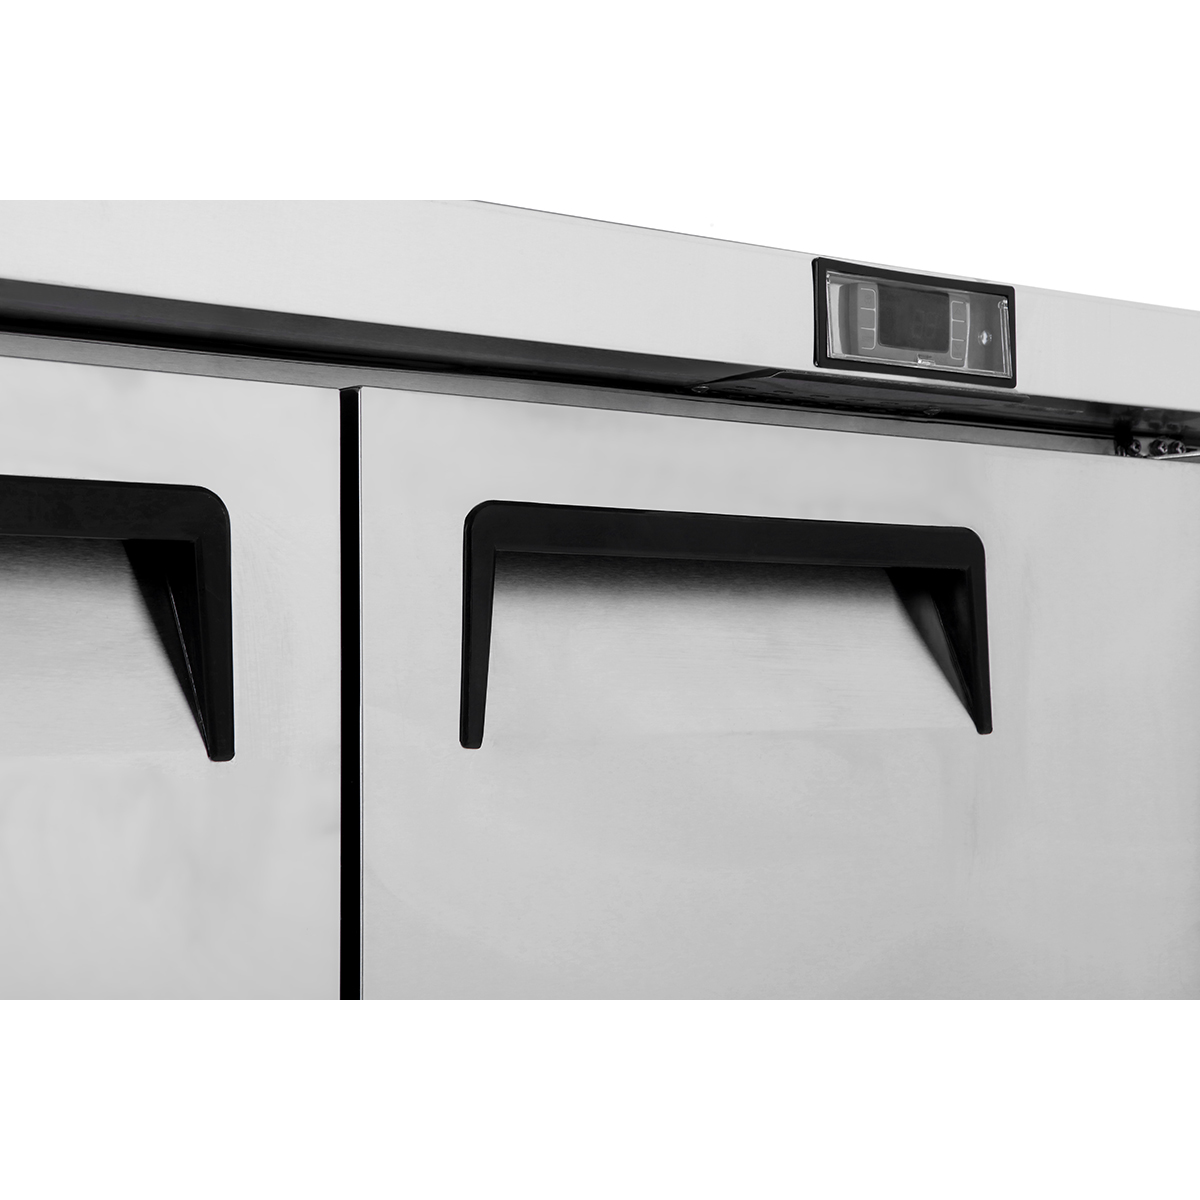 Atosa MGF8403GR Two Section Rear Mount Undercounter Refrigerator 60-1/4"W x 30"D x 34-1/8"H with 2 Solid Doors image 5